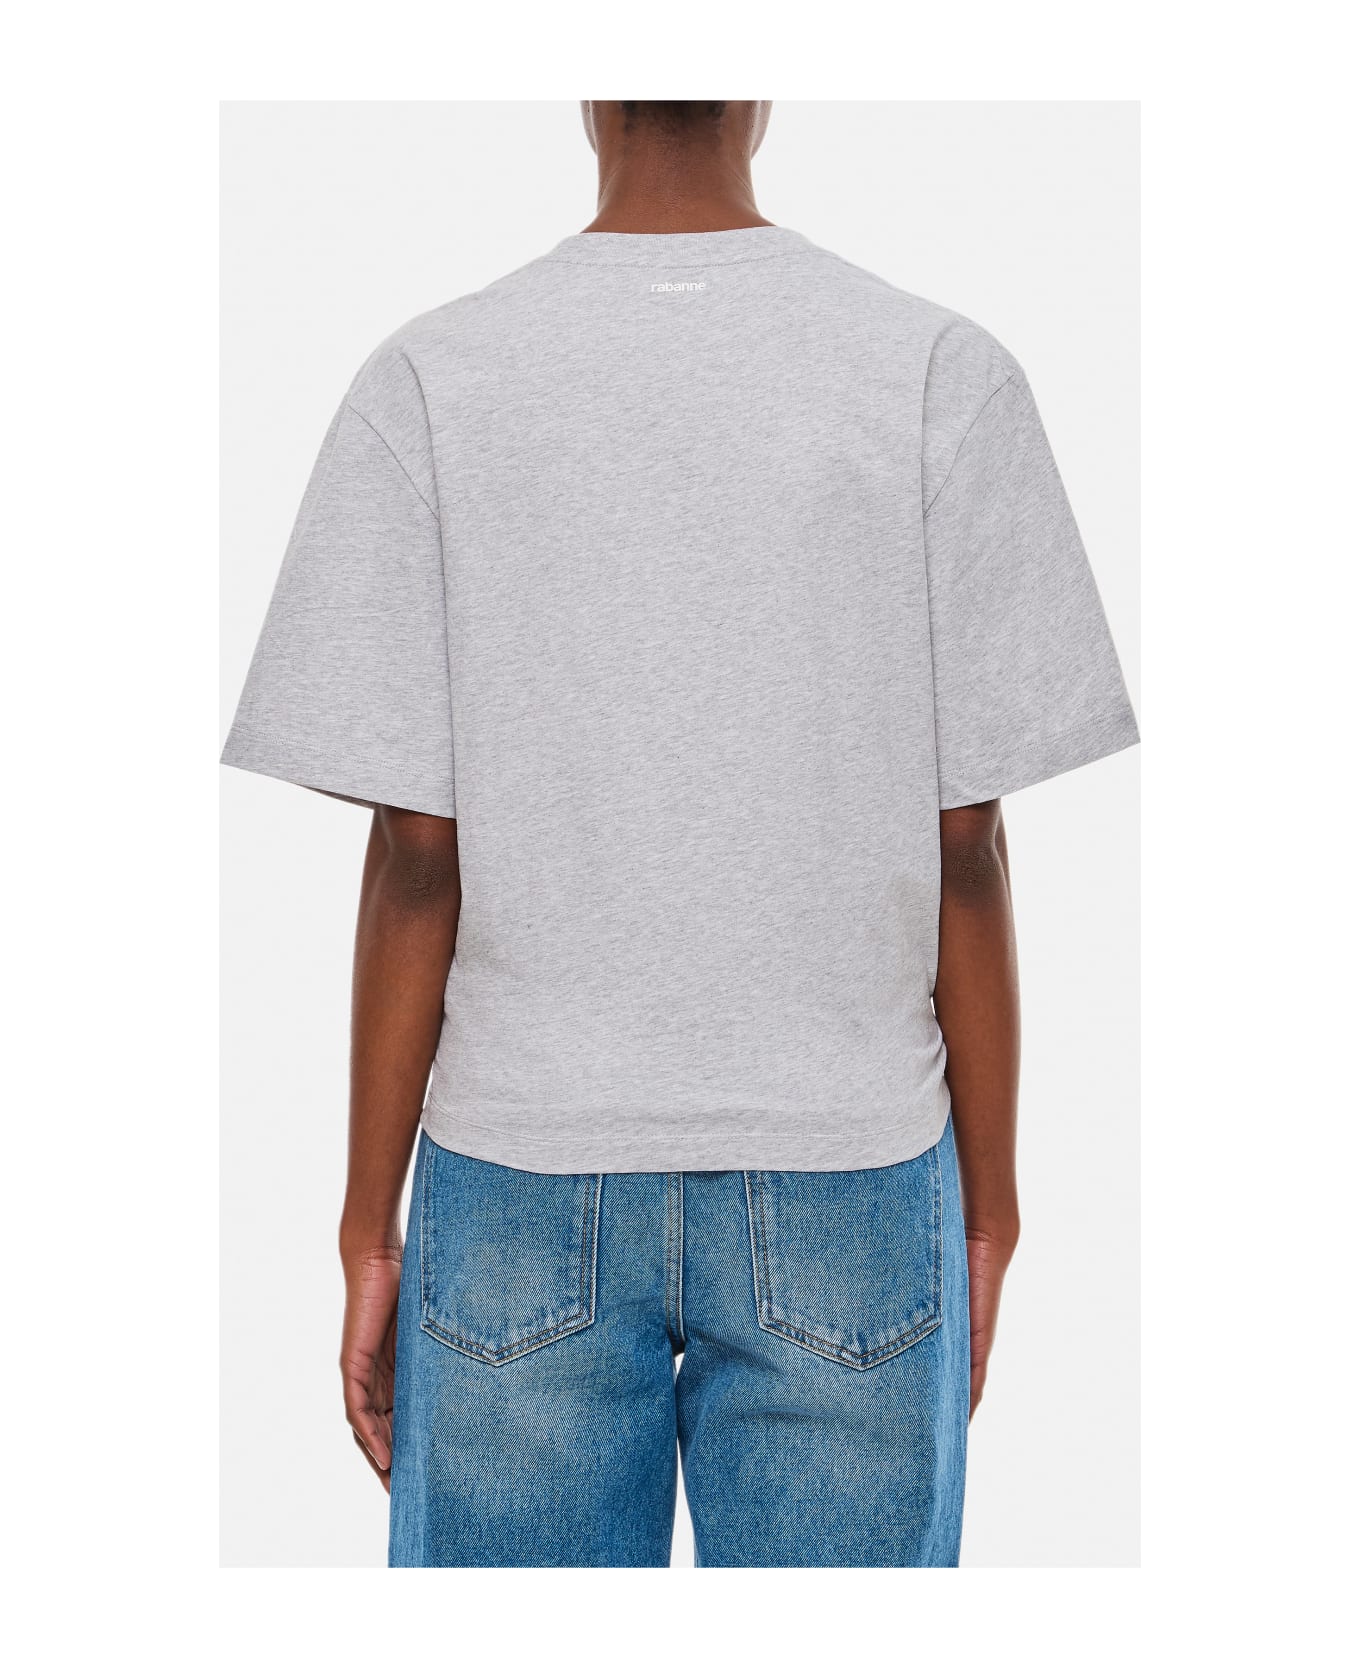 Paco Rabanne Cropped Cotton T-shirt - Grey Tシャツ